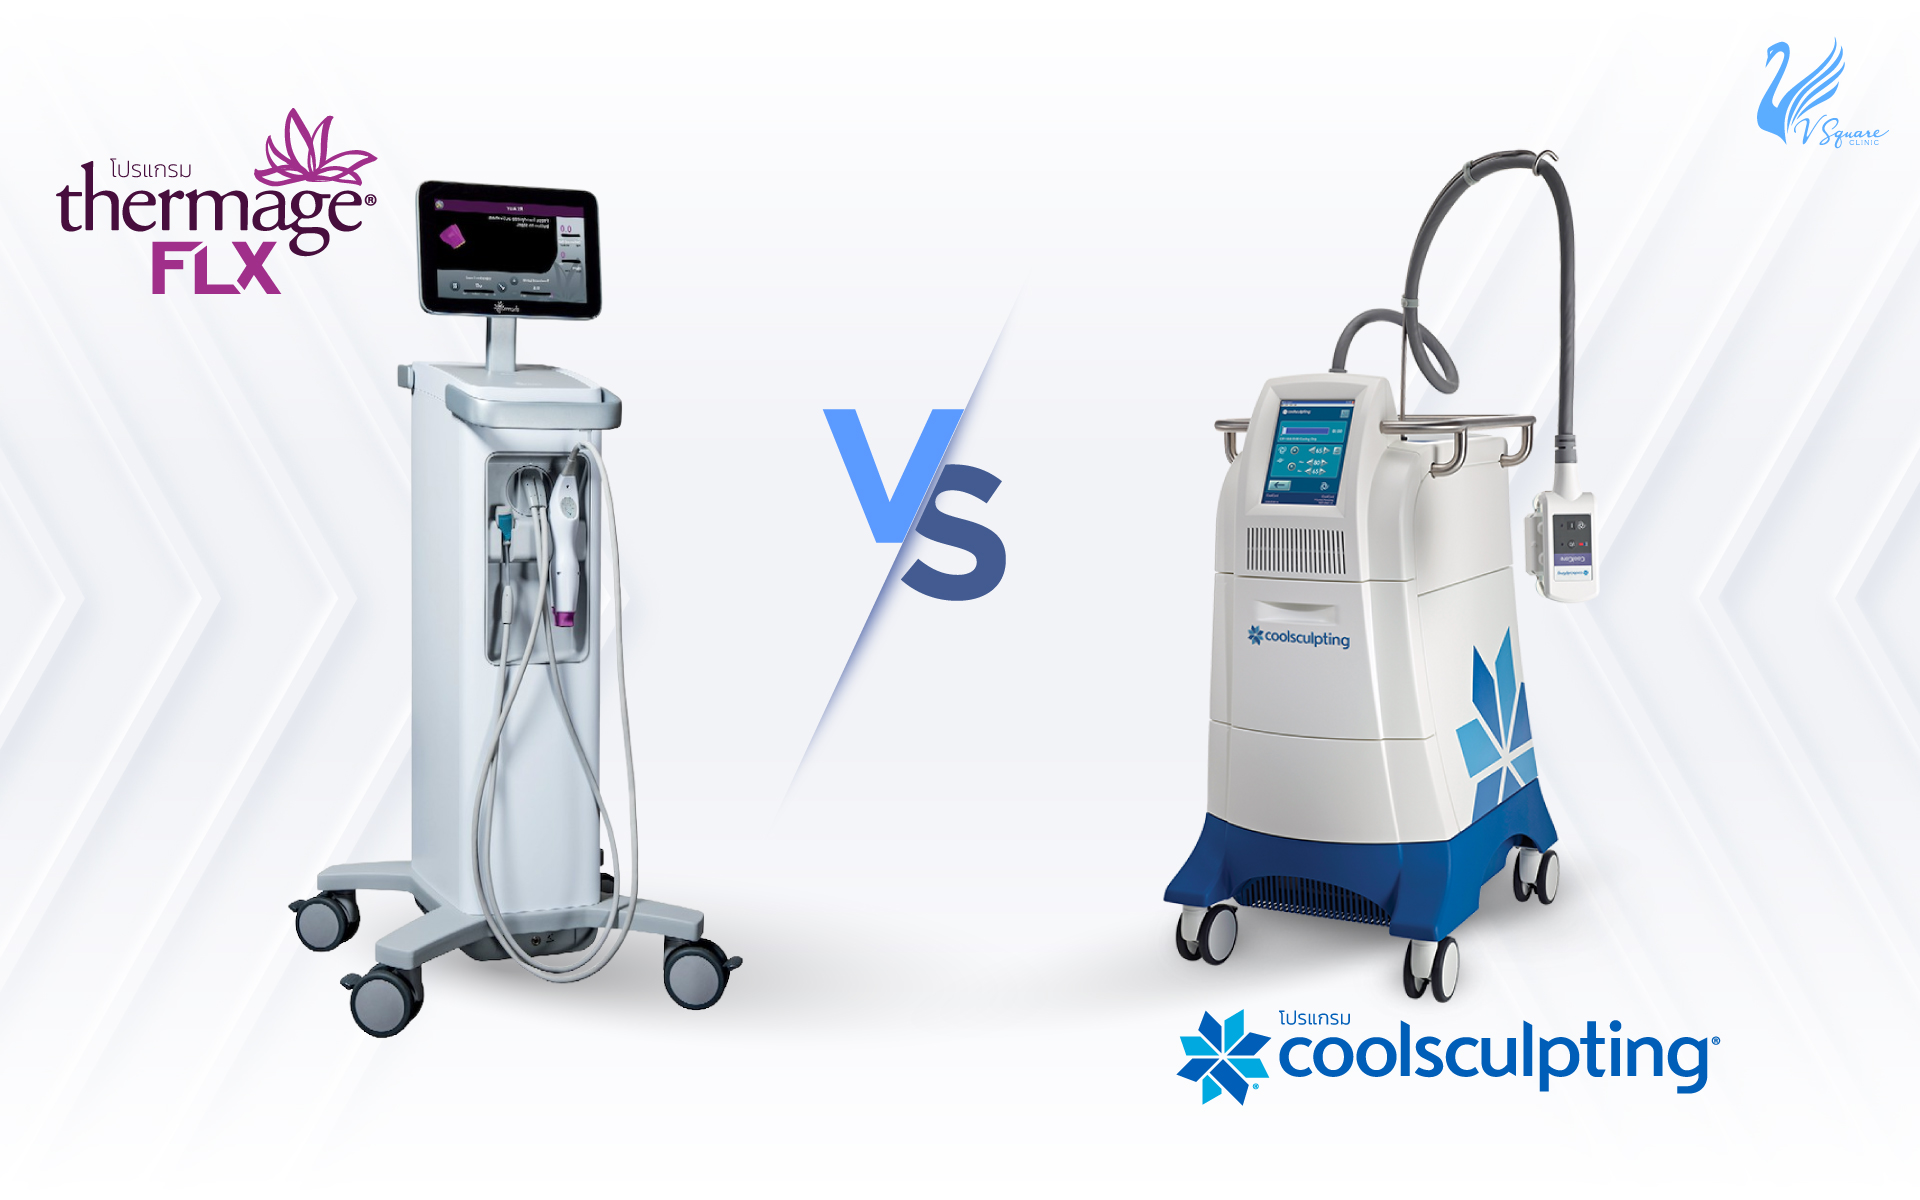 CoolSculpting VS Thermage